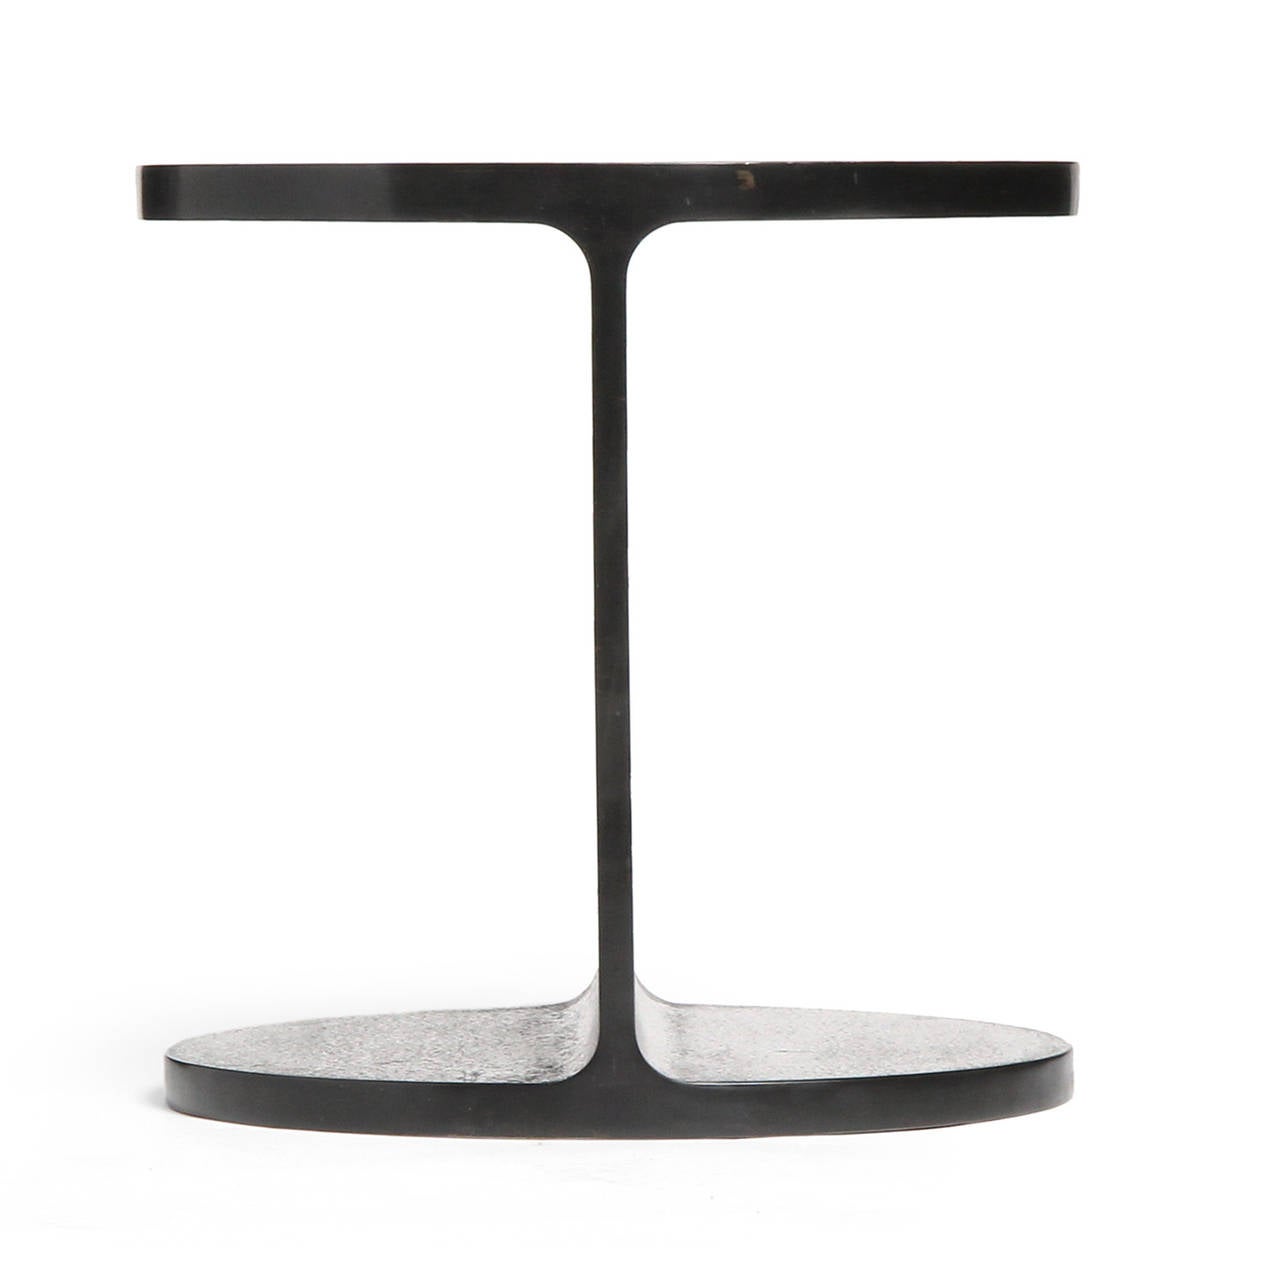 A superbly rendered and sublimely minimalist side table in the form of a perforated truncated I beam. Fashioned of hot rolled and welded steel with a polished natural grain surface, this versatile table can be left bare or topped with glass or stone.